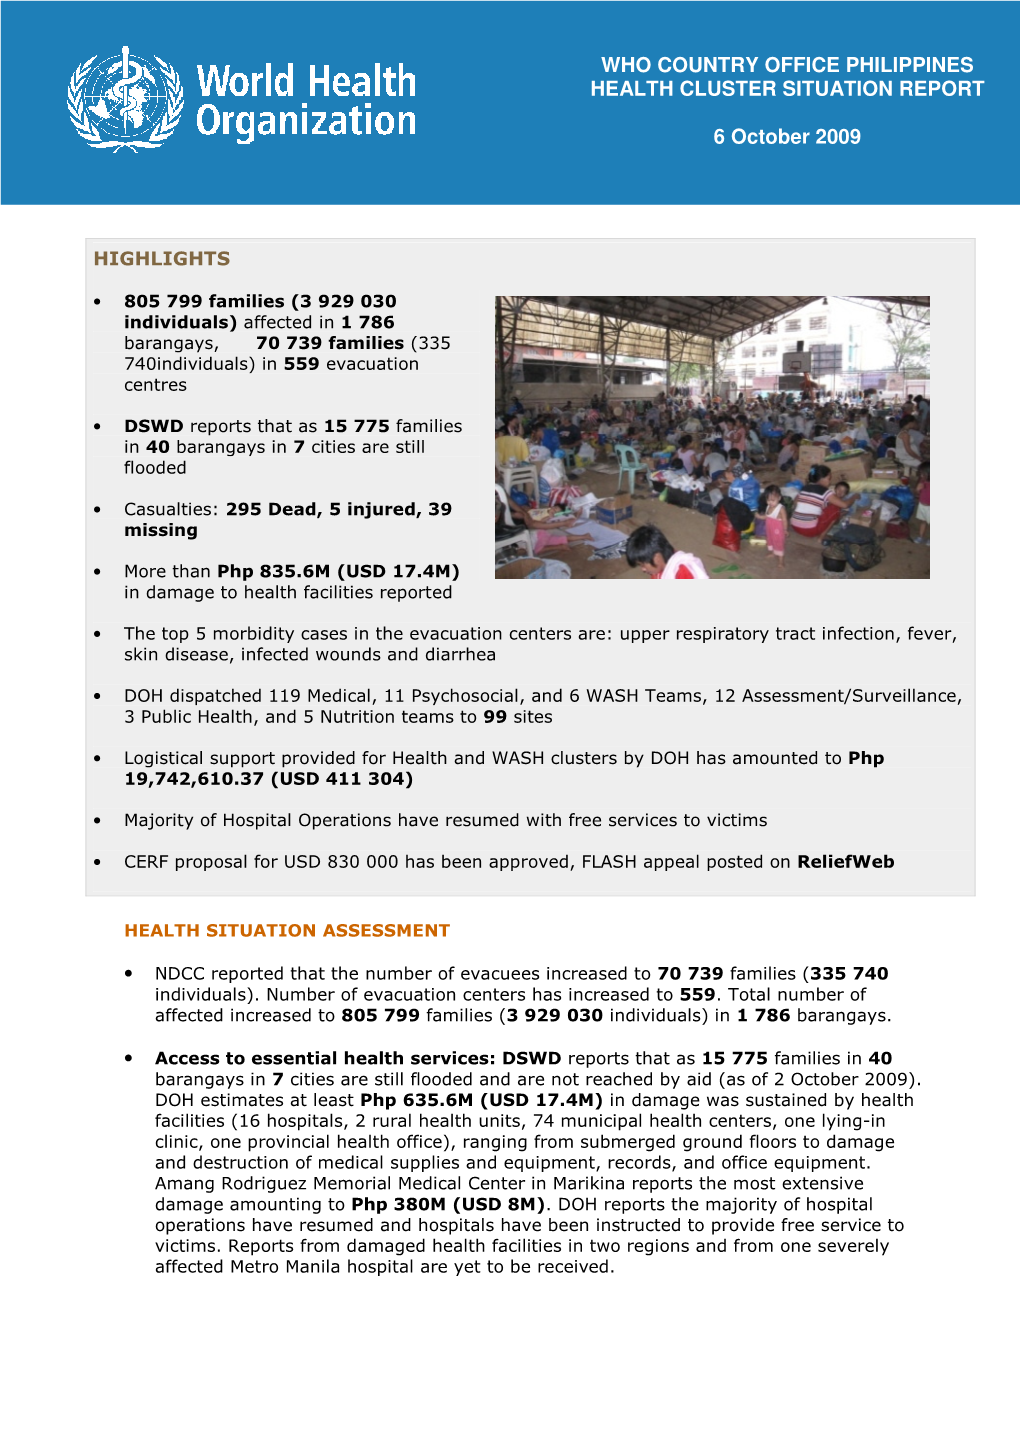 Who Country Office Philippines Health Cluster Situation Report